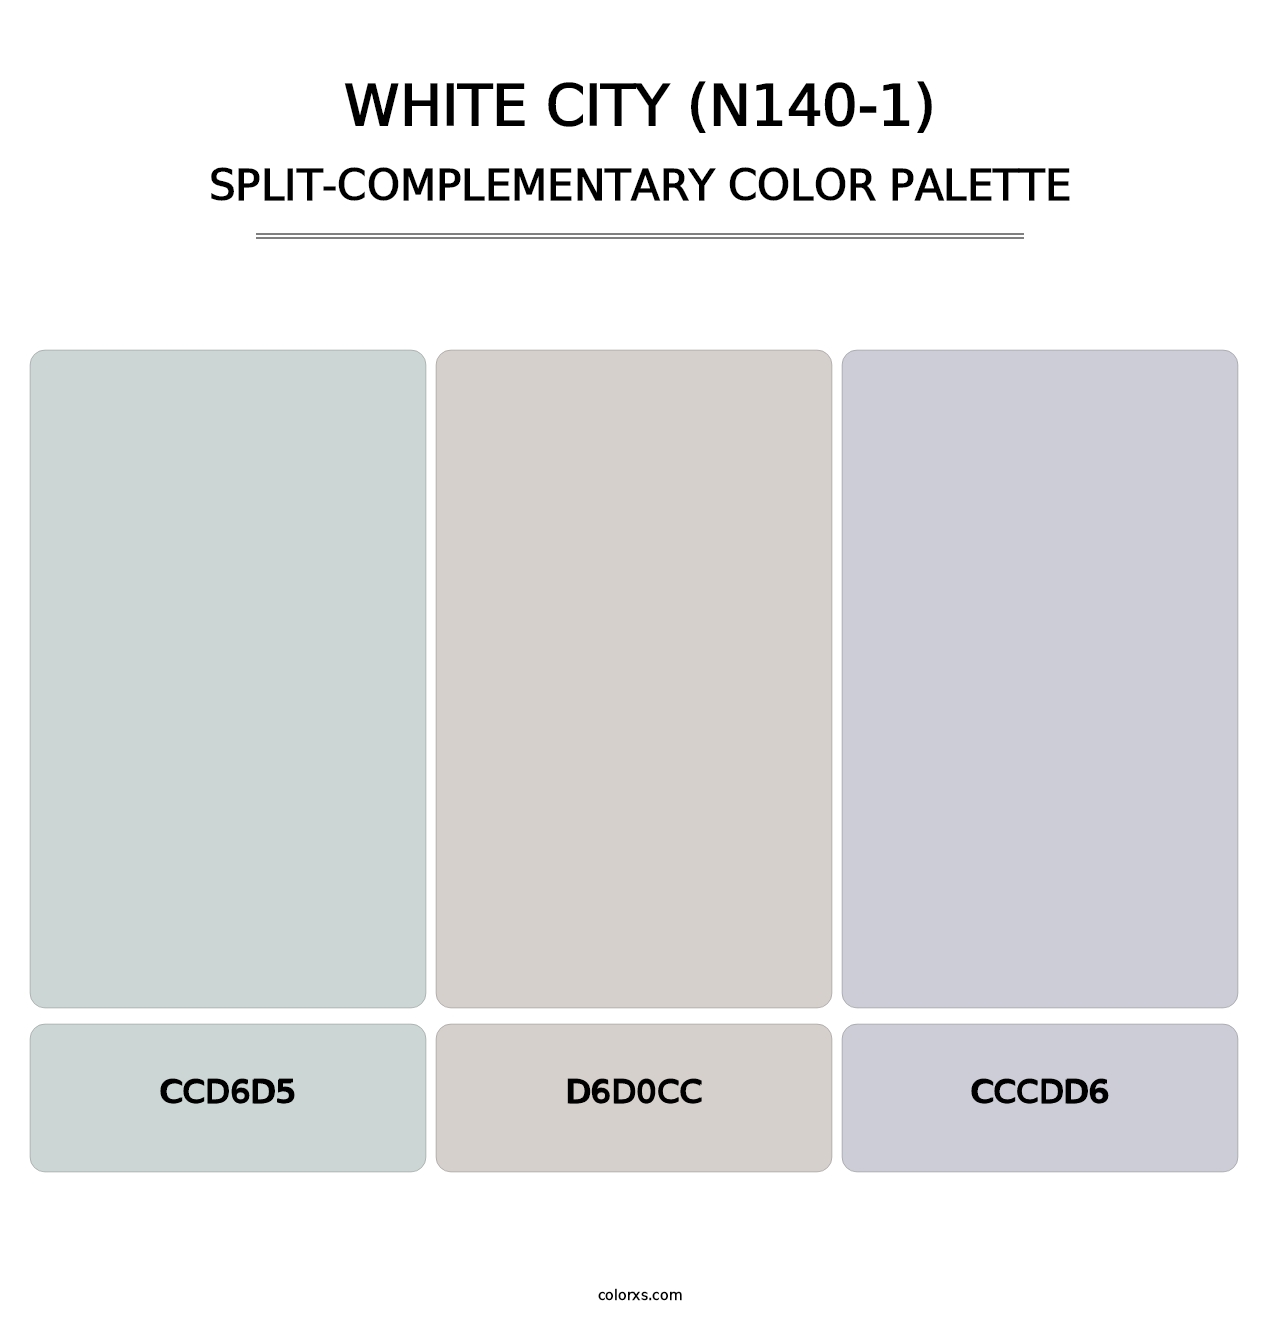 White City (N140-1) - Split-Complementary Color Palette